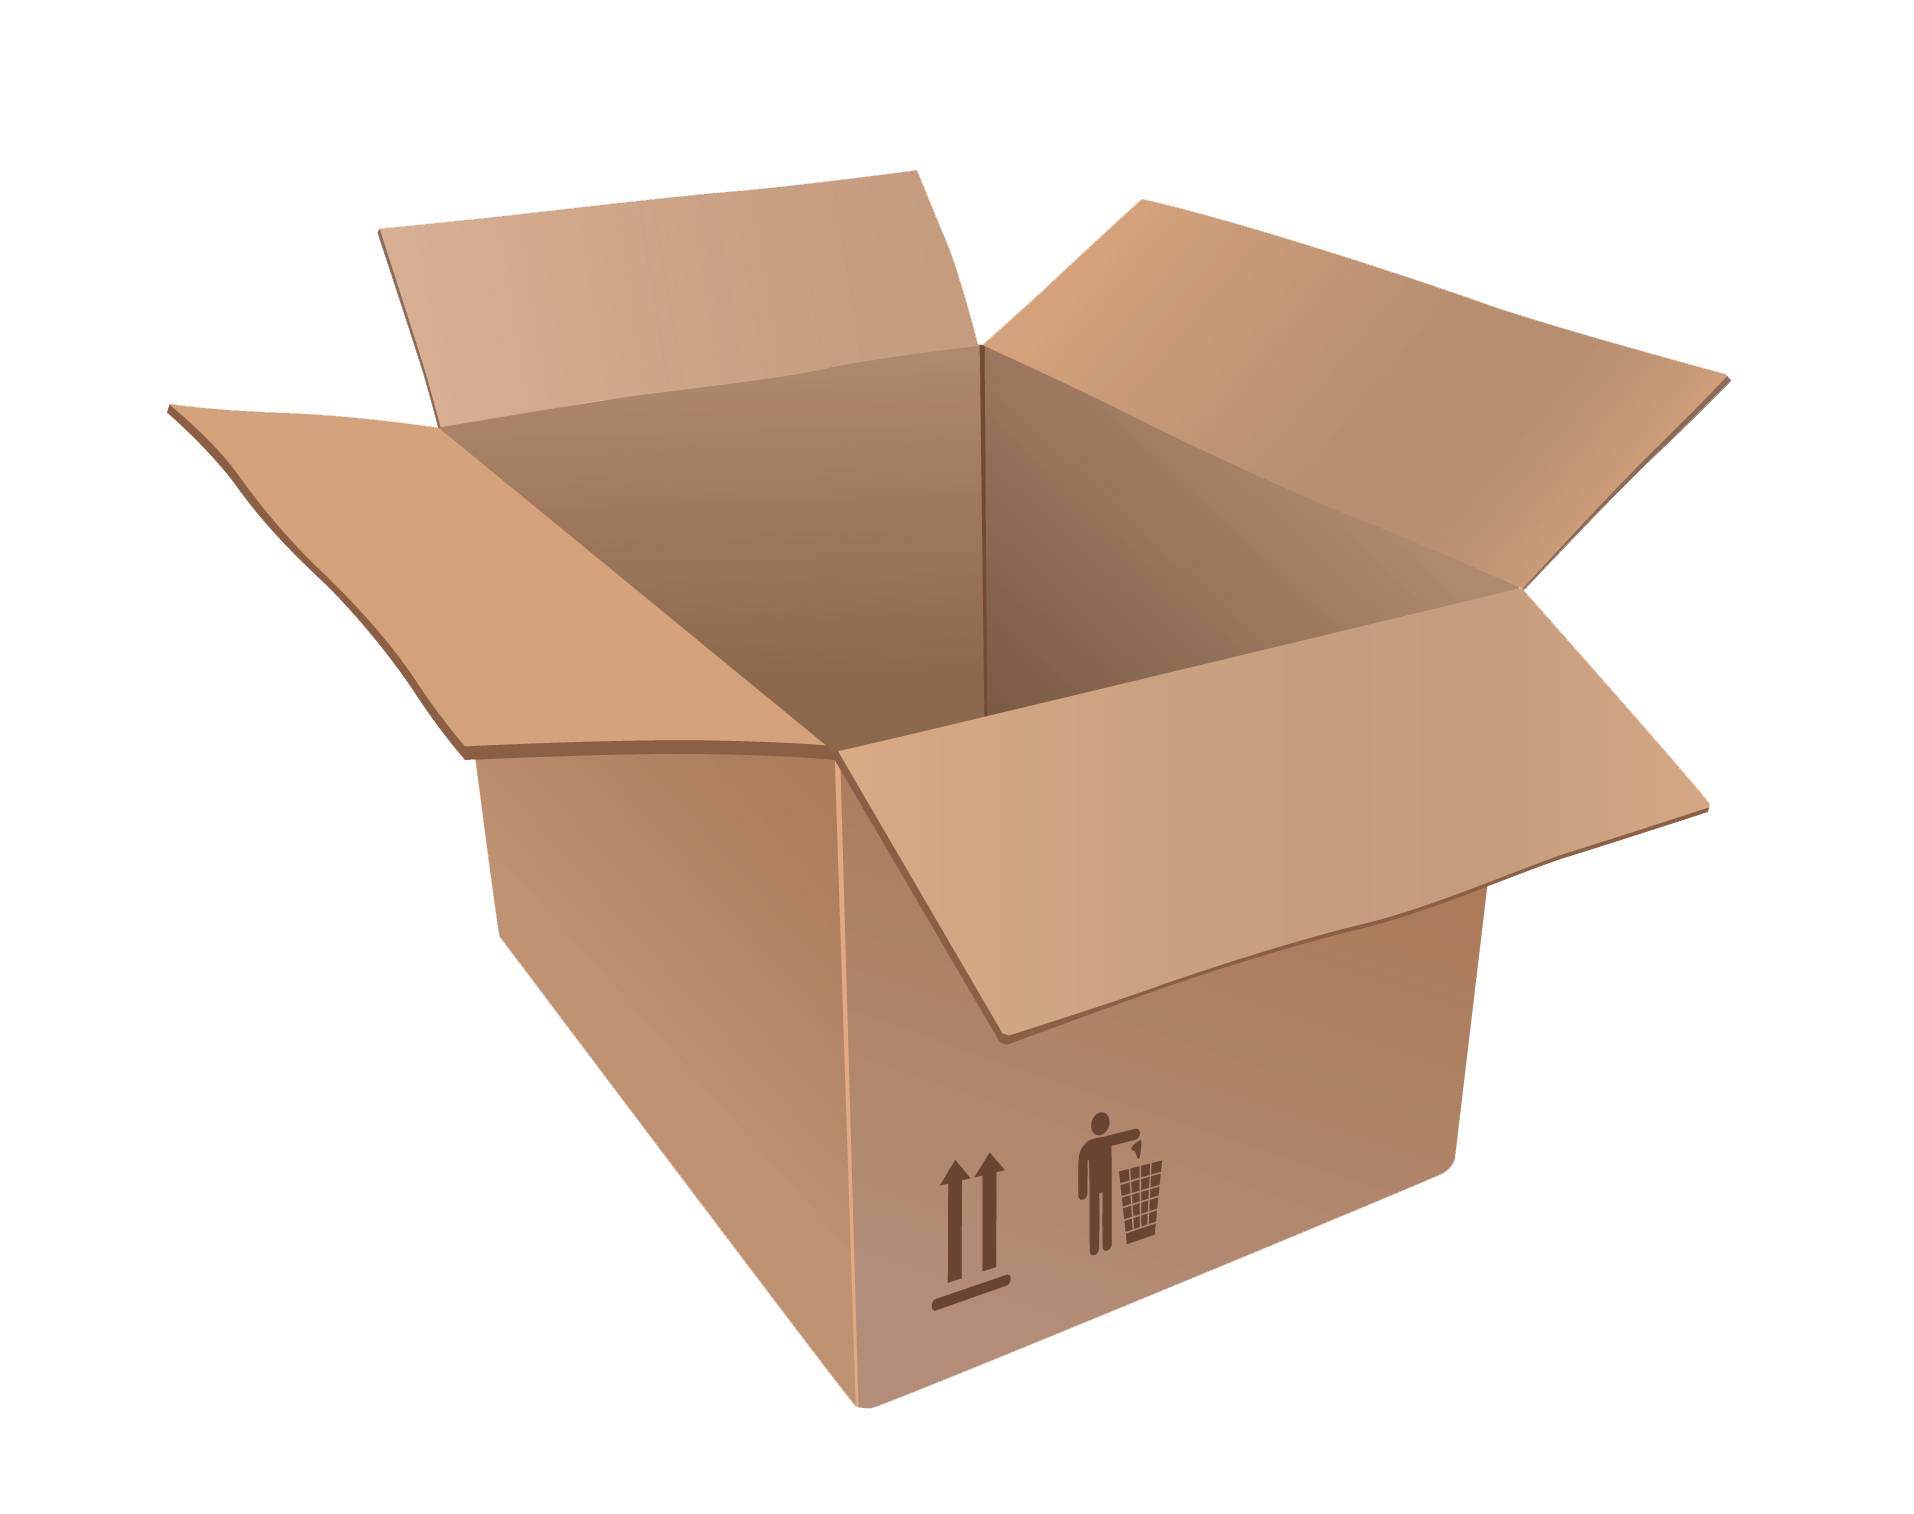 Moving Boxes Images - Cliparts.co